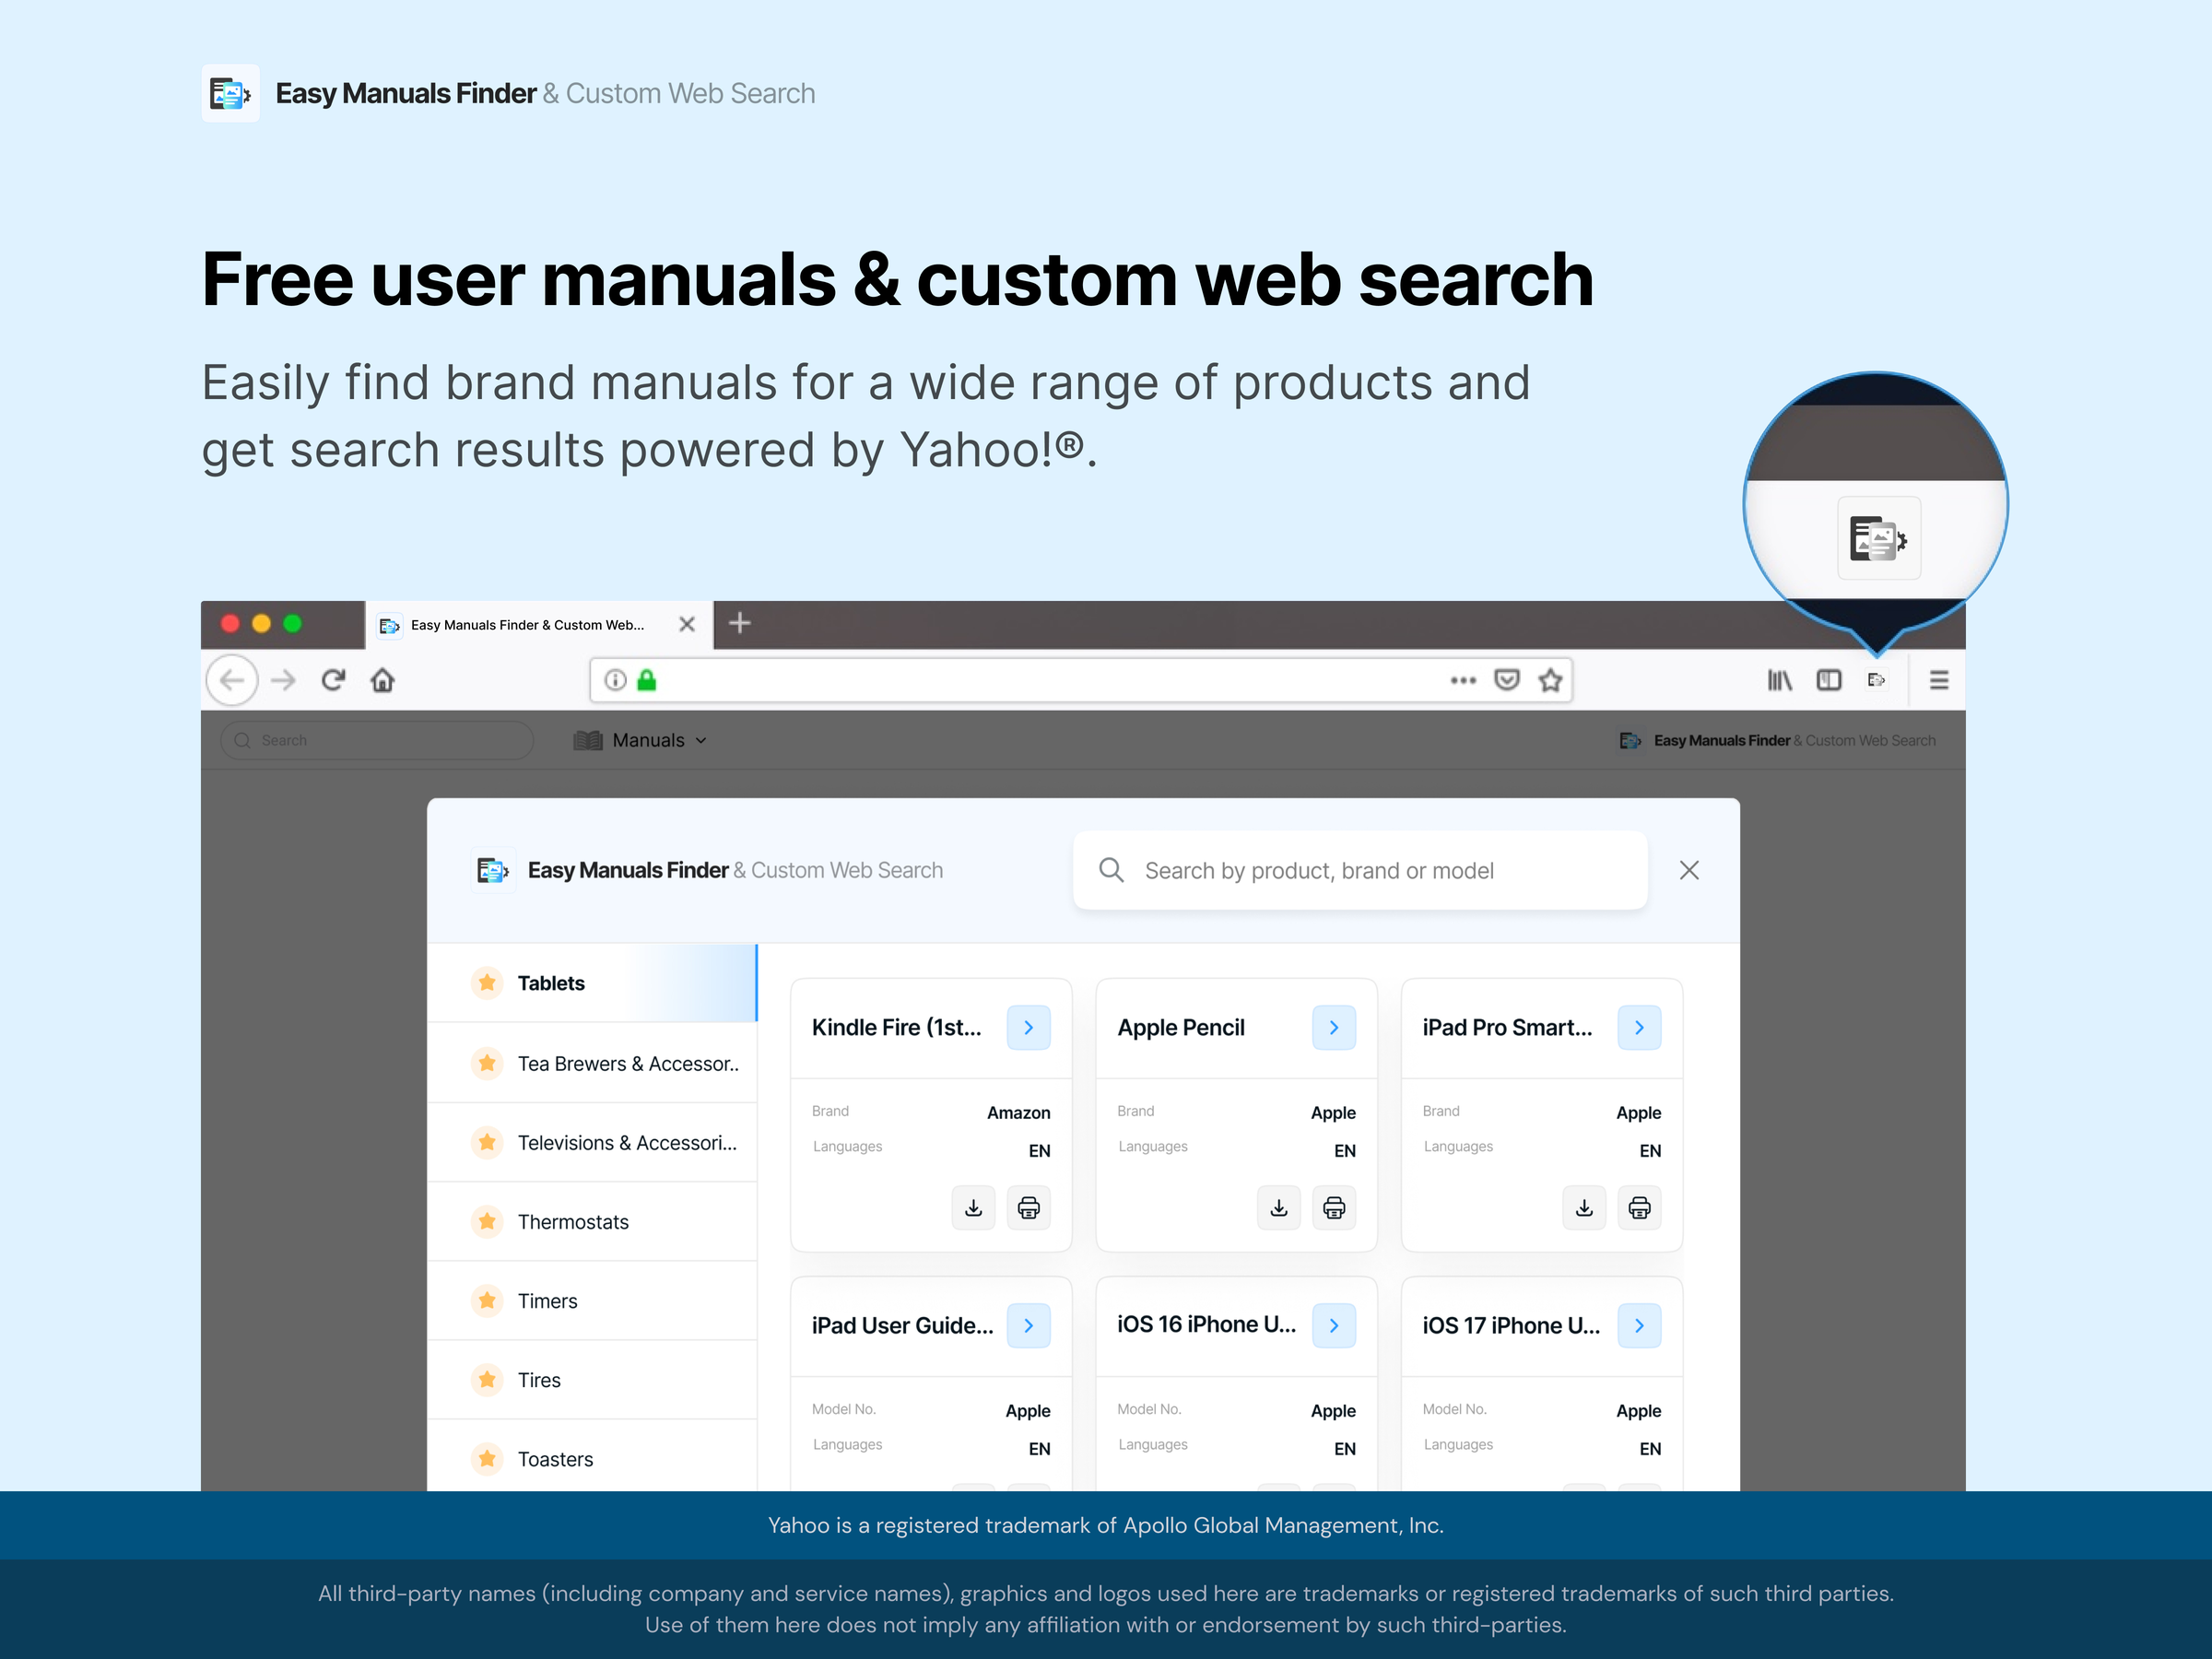 Easy Manuals Finder & Custom Web Search